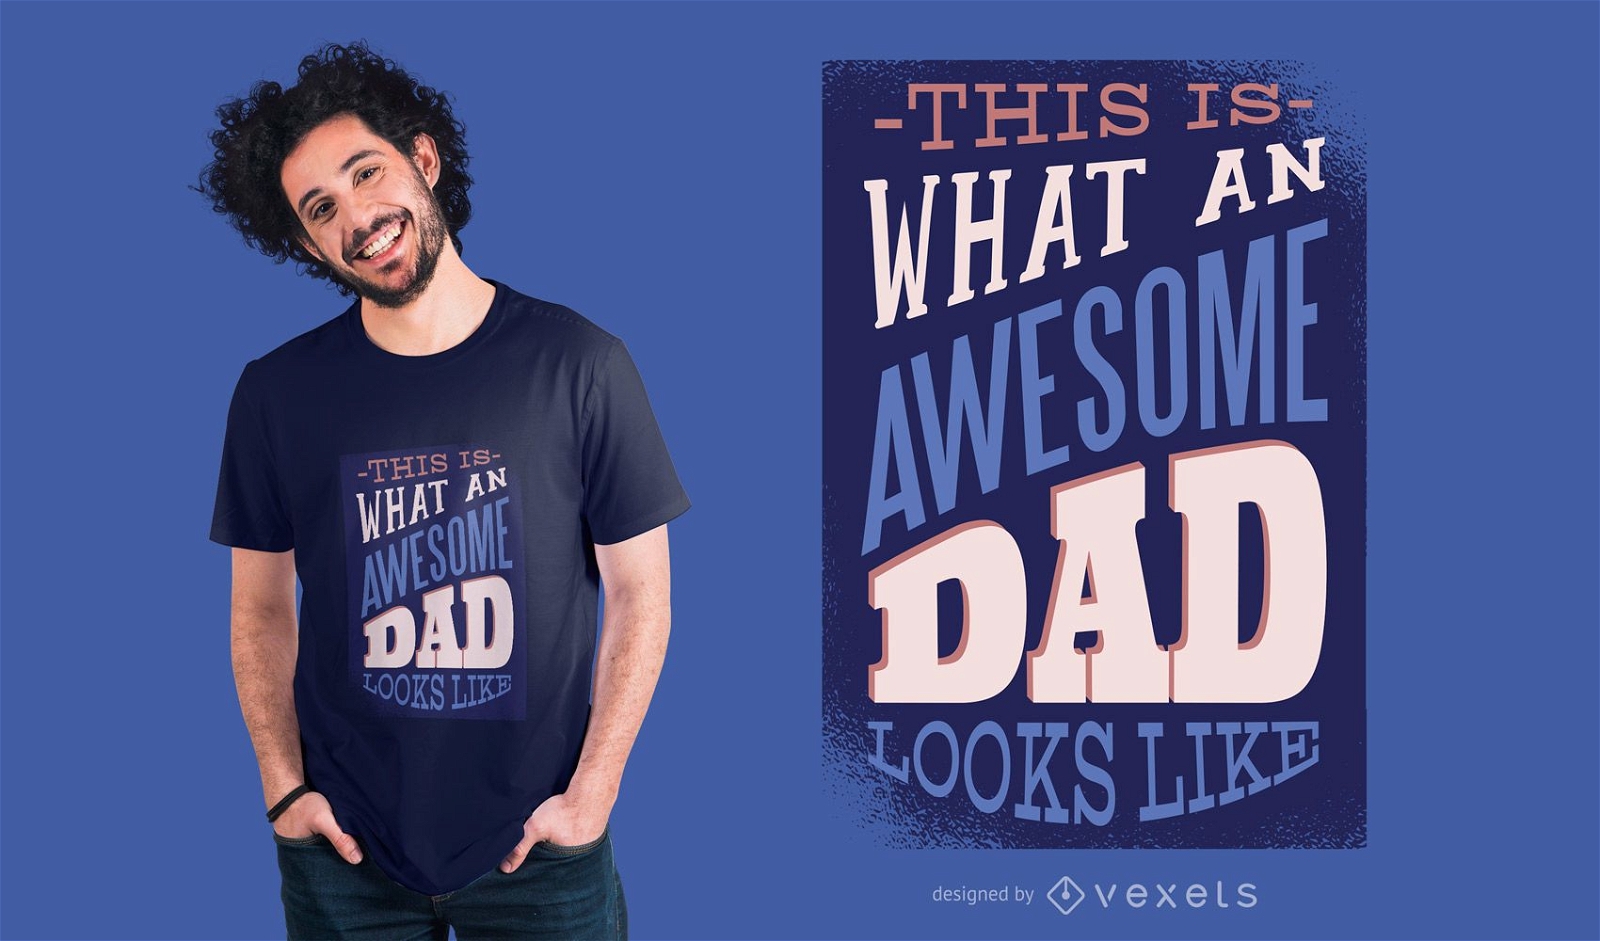 Awesome dad quote T-shirt Design 